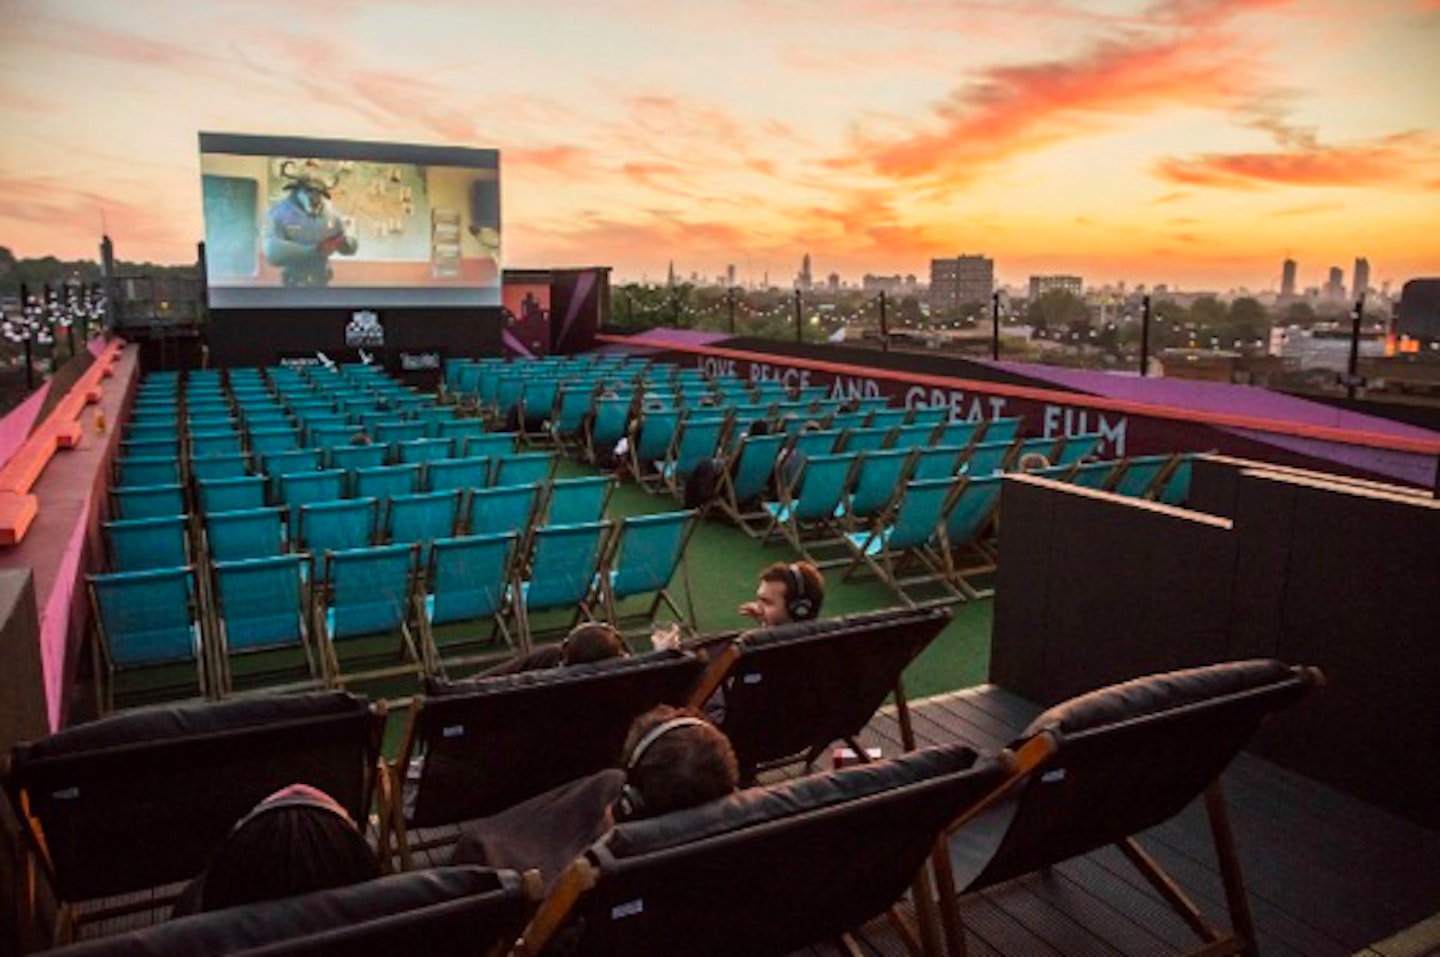 Watch a classic film on a rooftop in Peckham